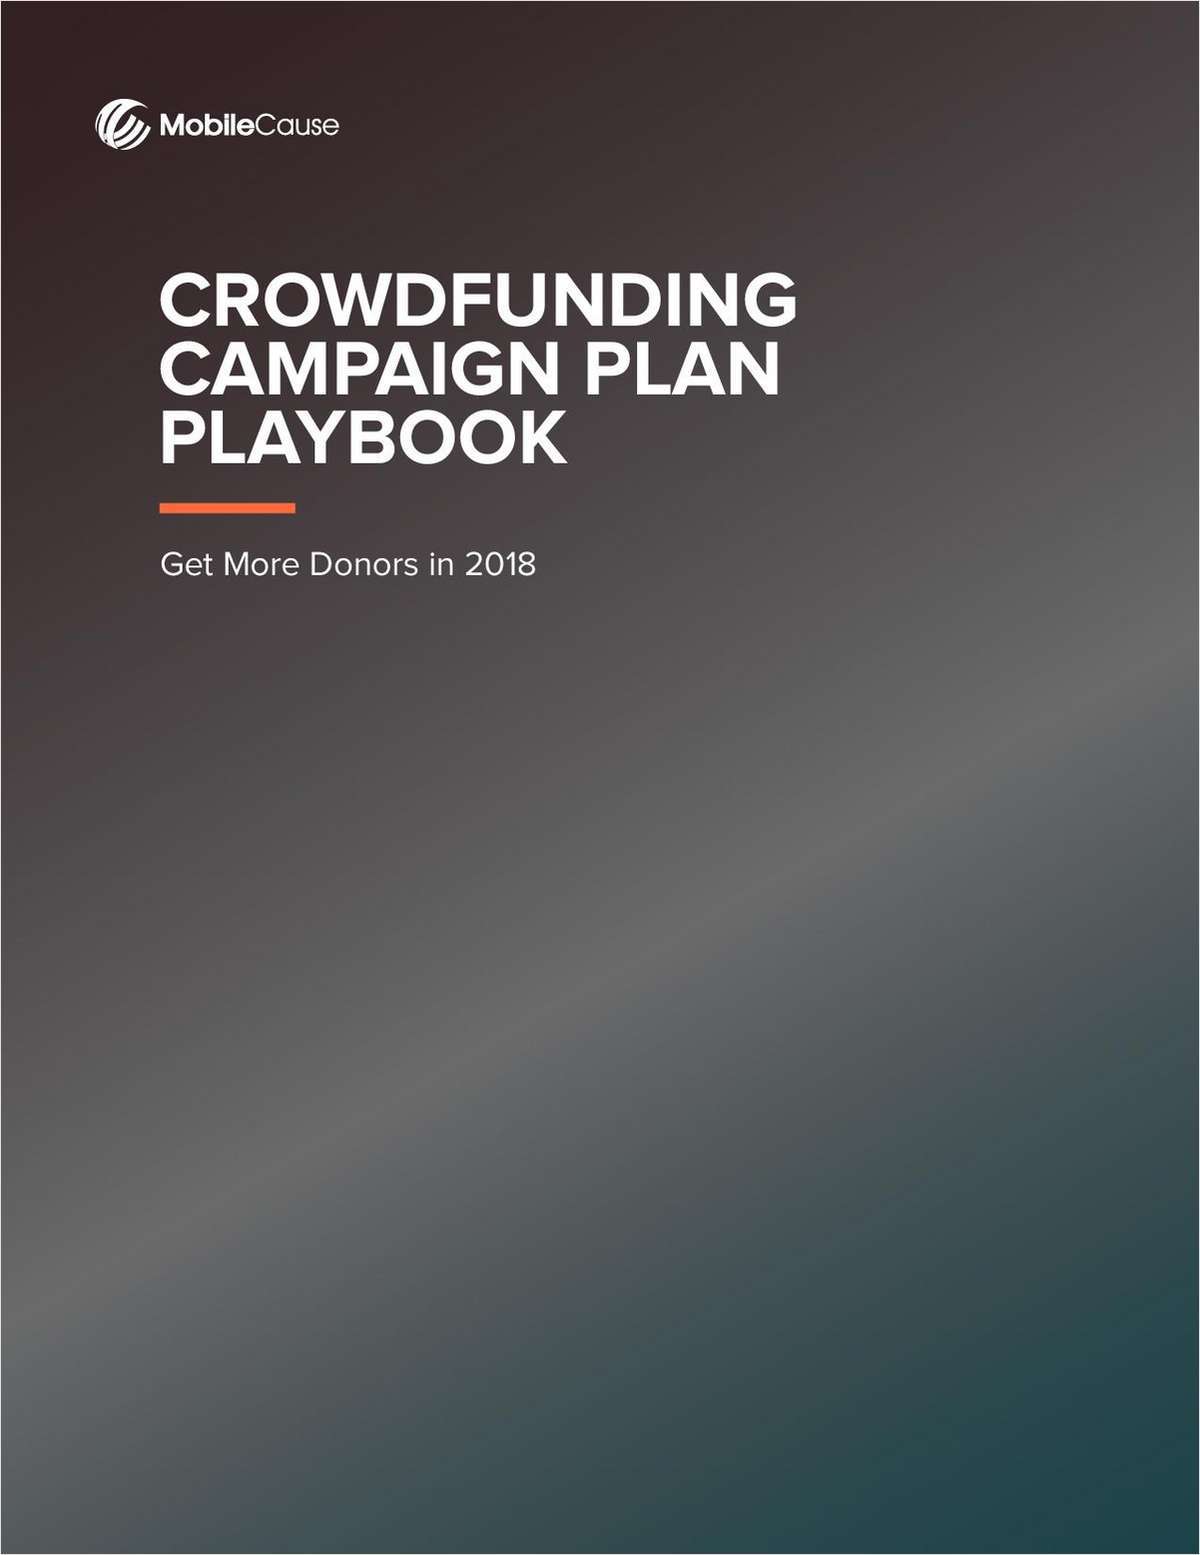 Your Crowdfunding Campaign Playbook